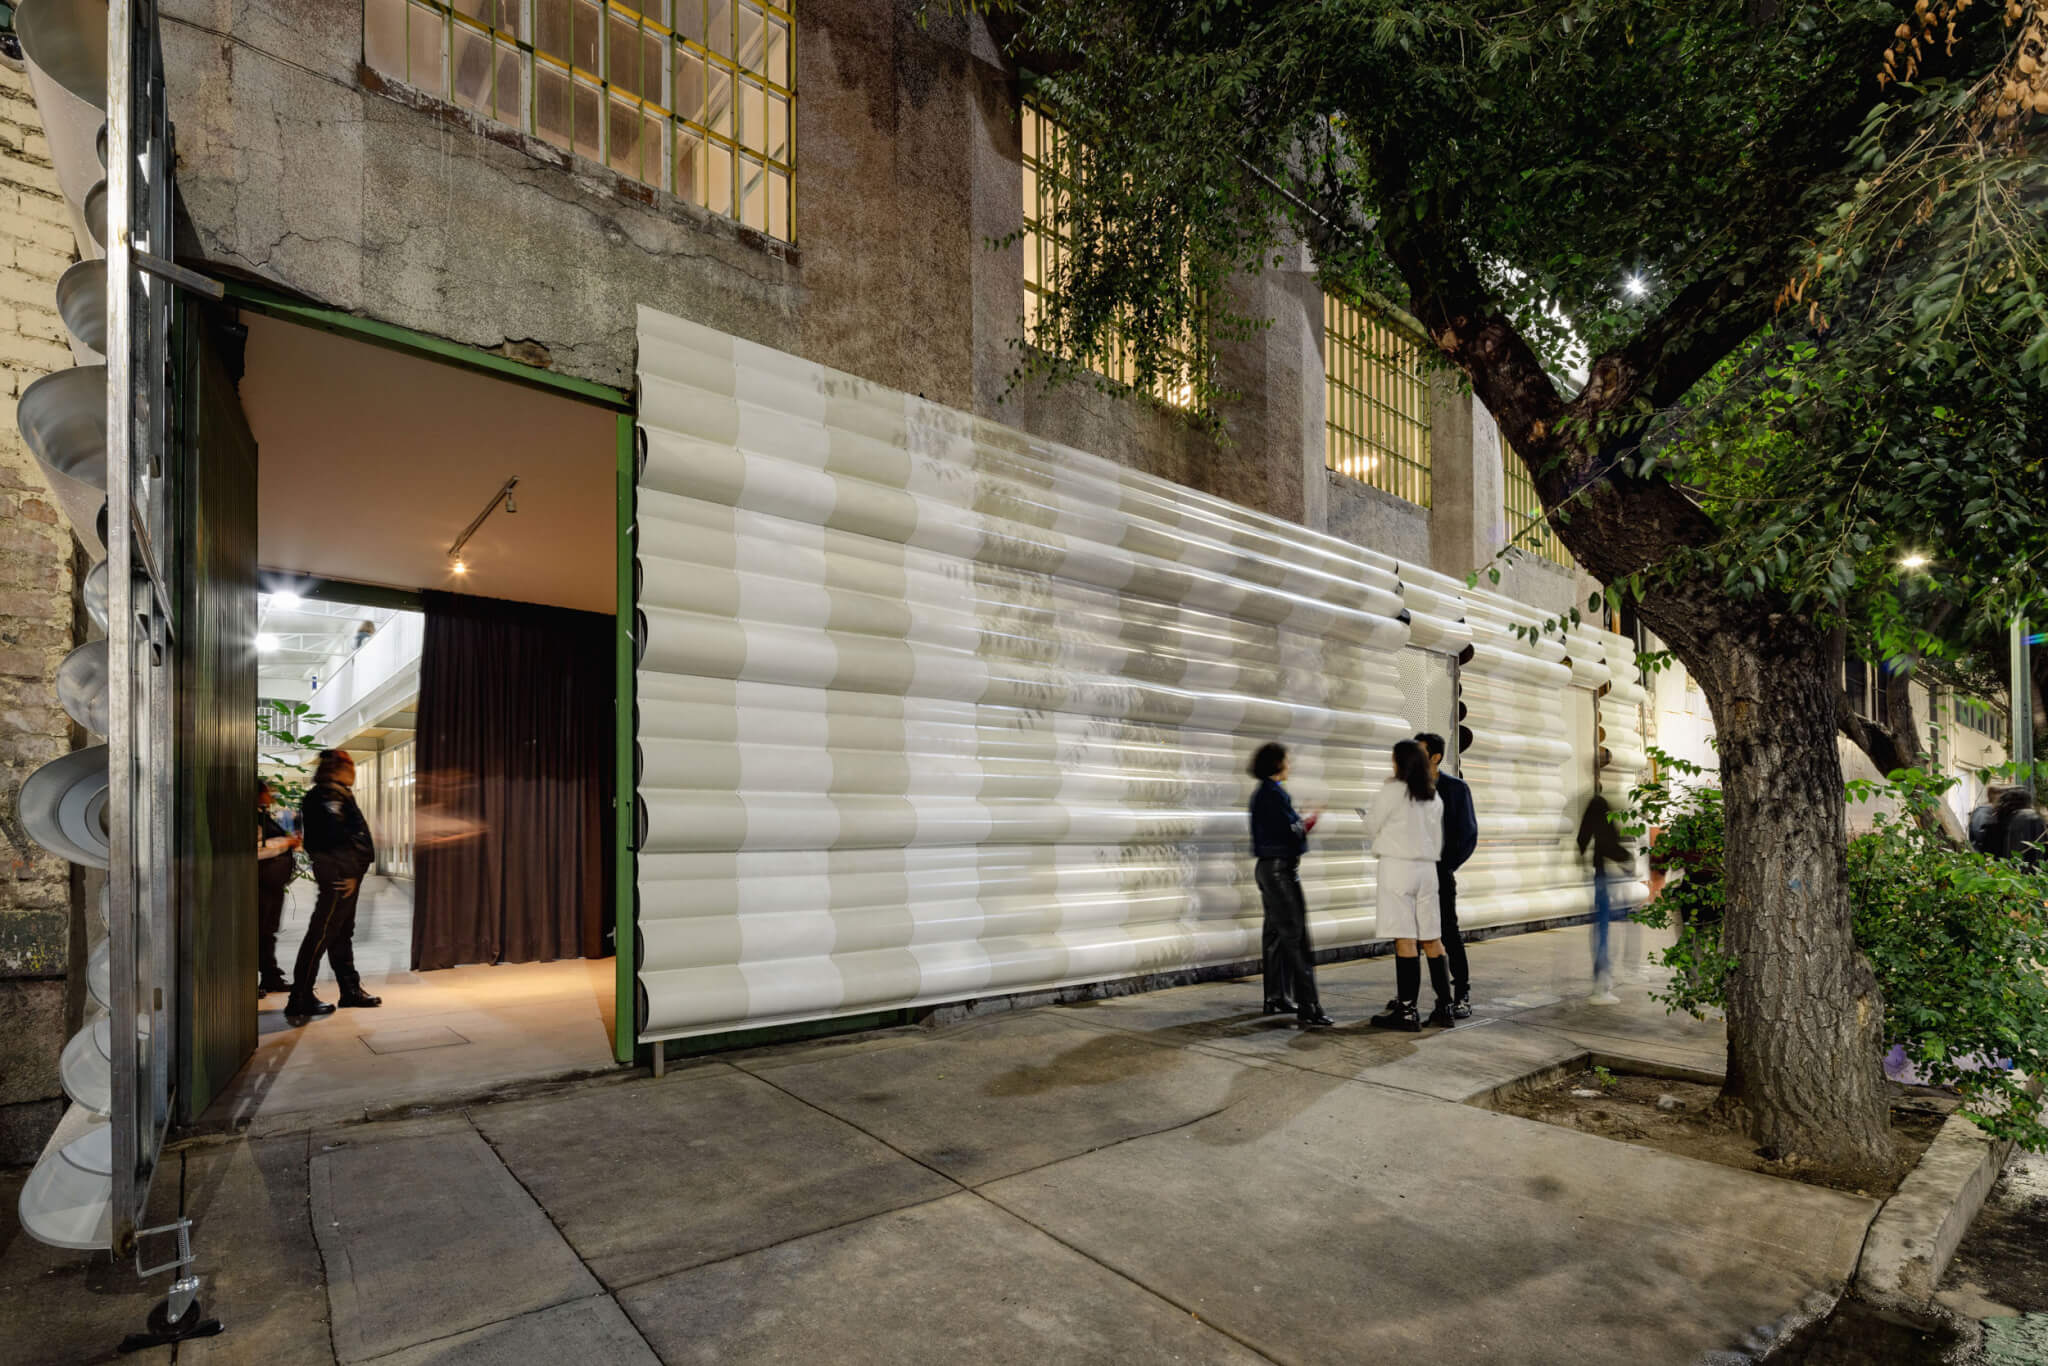 A white and beige striped facade underneath a warehouse building. The door to the studio is open, revealing the contrast between the outside and inside. People passing by converse by the tree in front of the building.